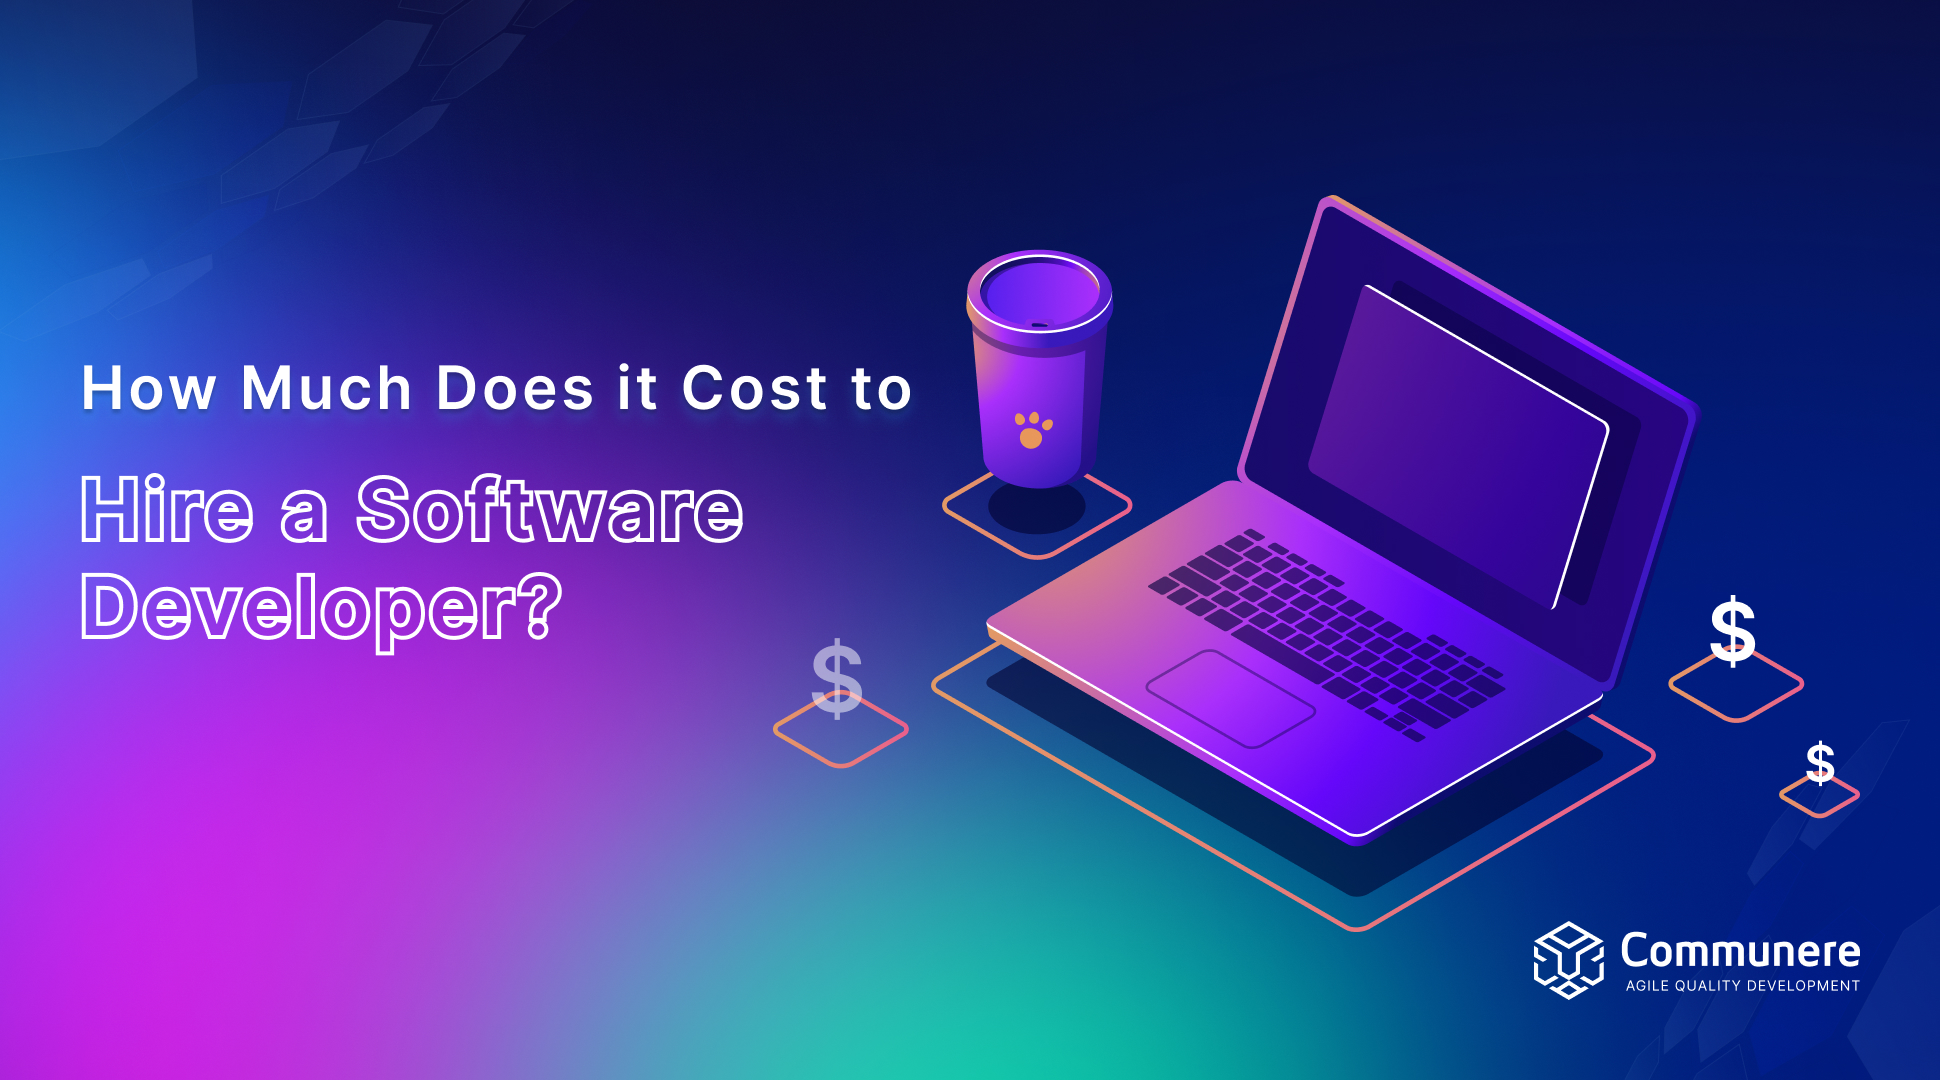 How Much Does A Software Developer Cost?